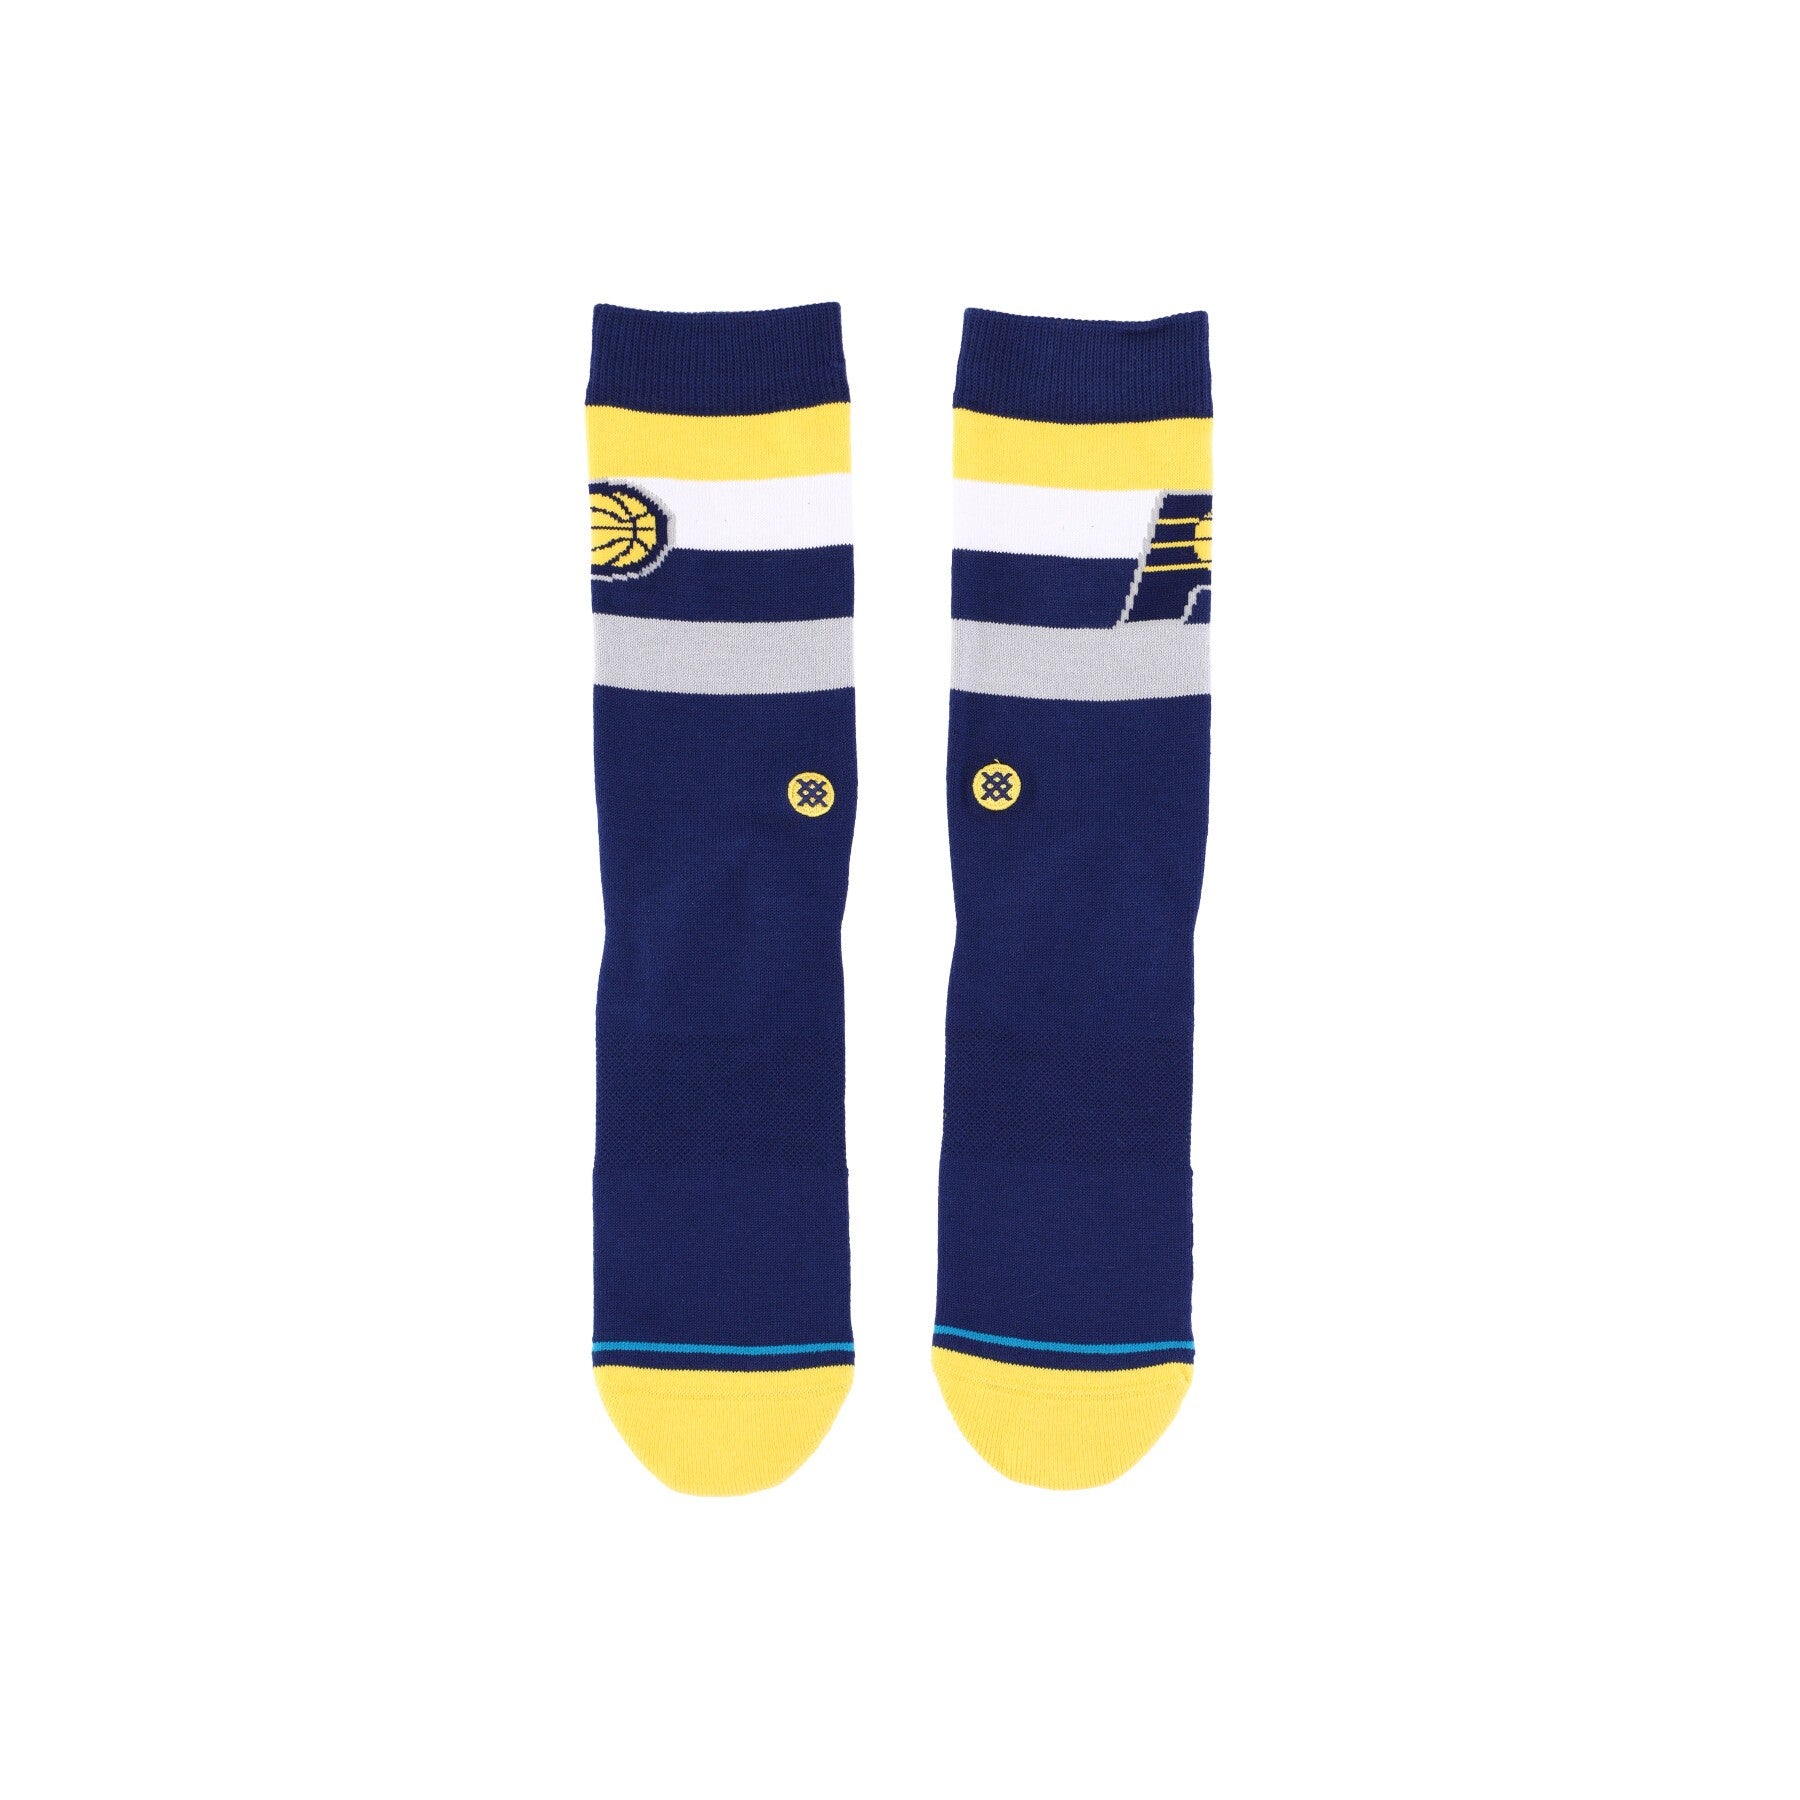 Stance, Calza Media Uomo Pacers St Crew, Navy